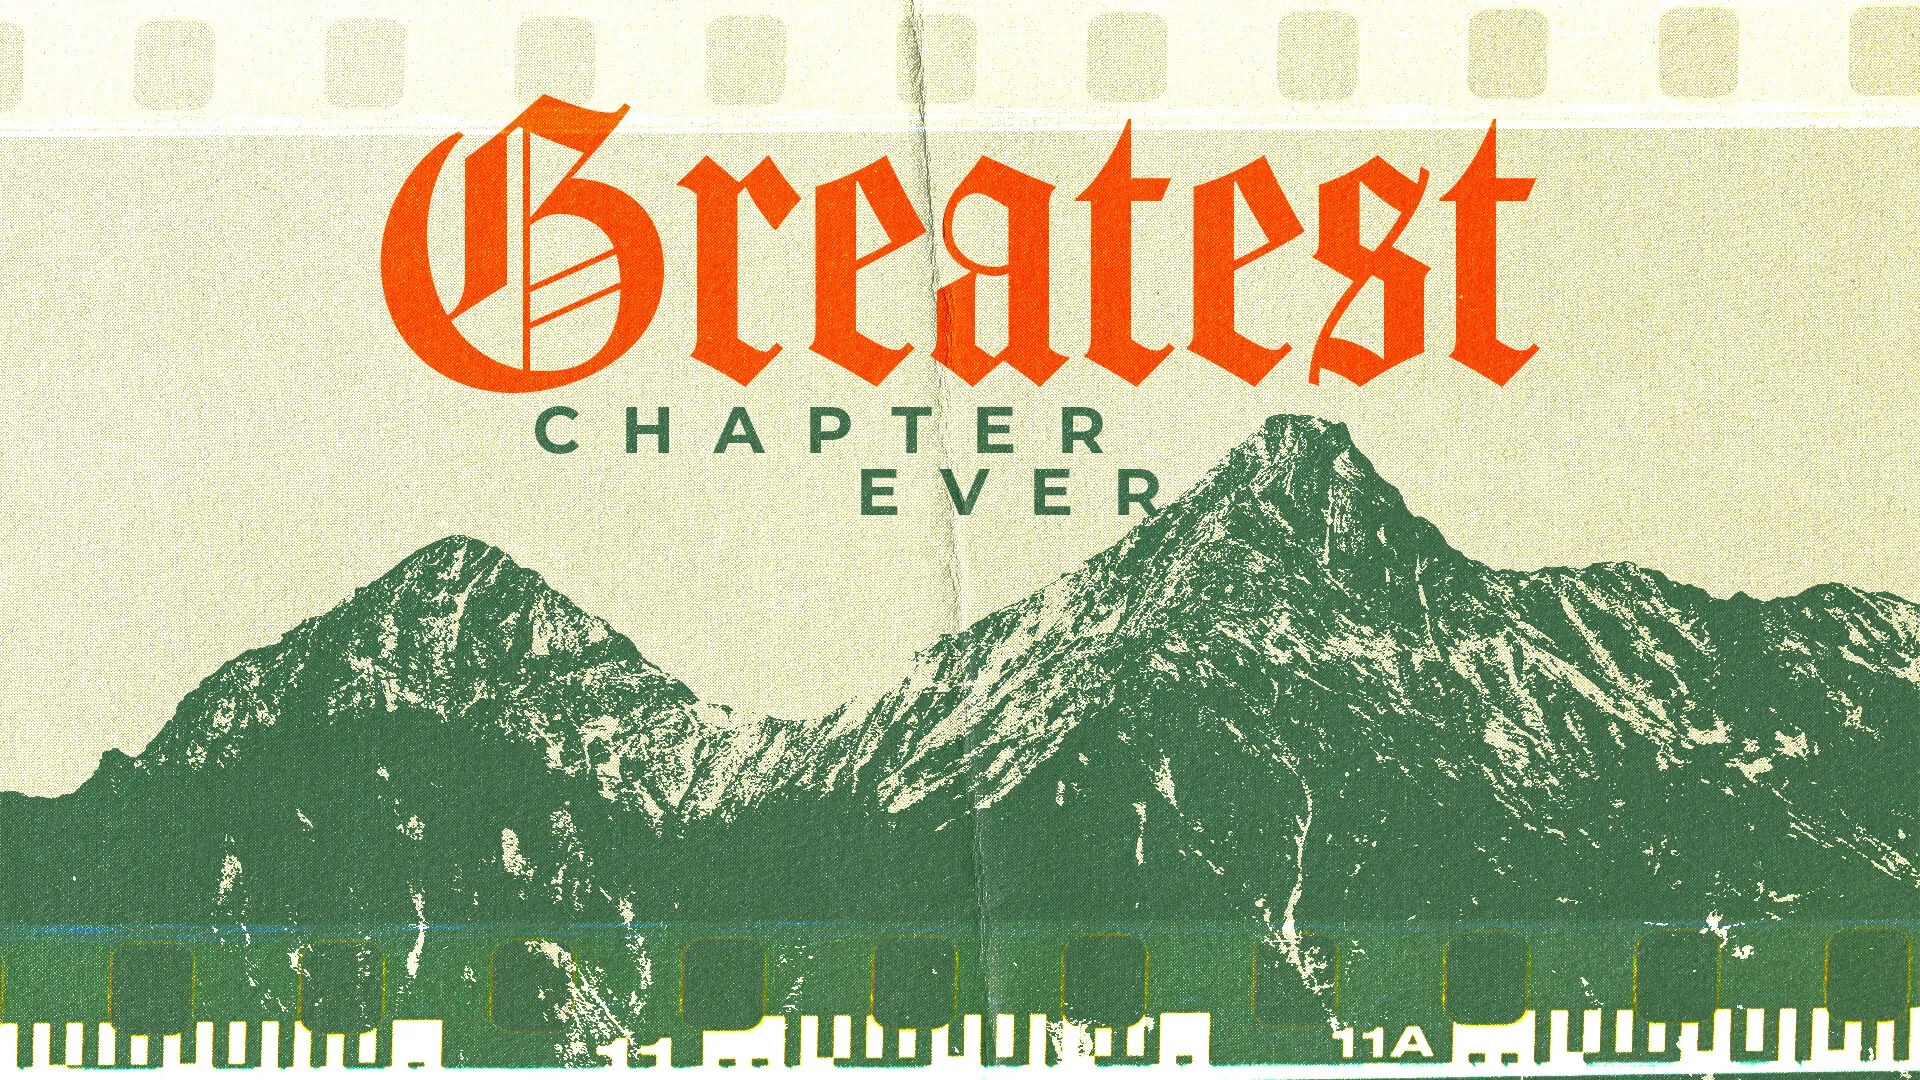 Bring Your Congregation'S Focus To The Epic Narratives Of Faith With &Quot;Greatest Chapter Ever,&Quot; A Church Media Graphic That Stands Out With Its Vintage Filmstrip Design And Bold Typography. Perfect For A Series On The Most Powerful Biblical Passages.